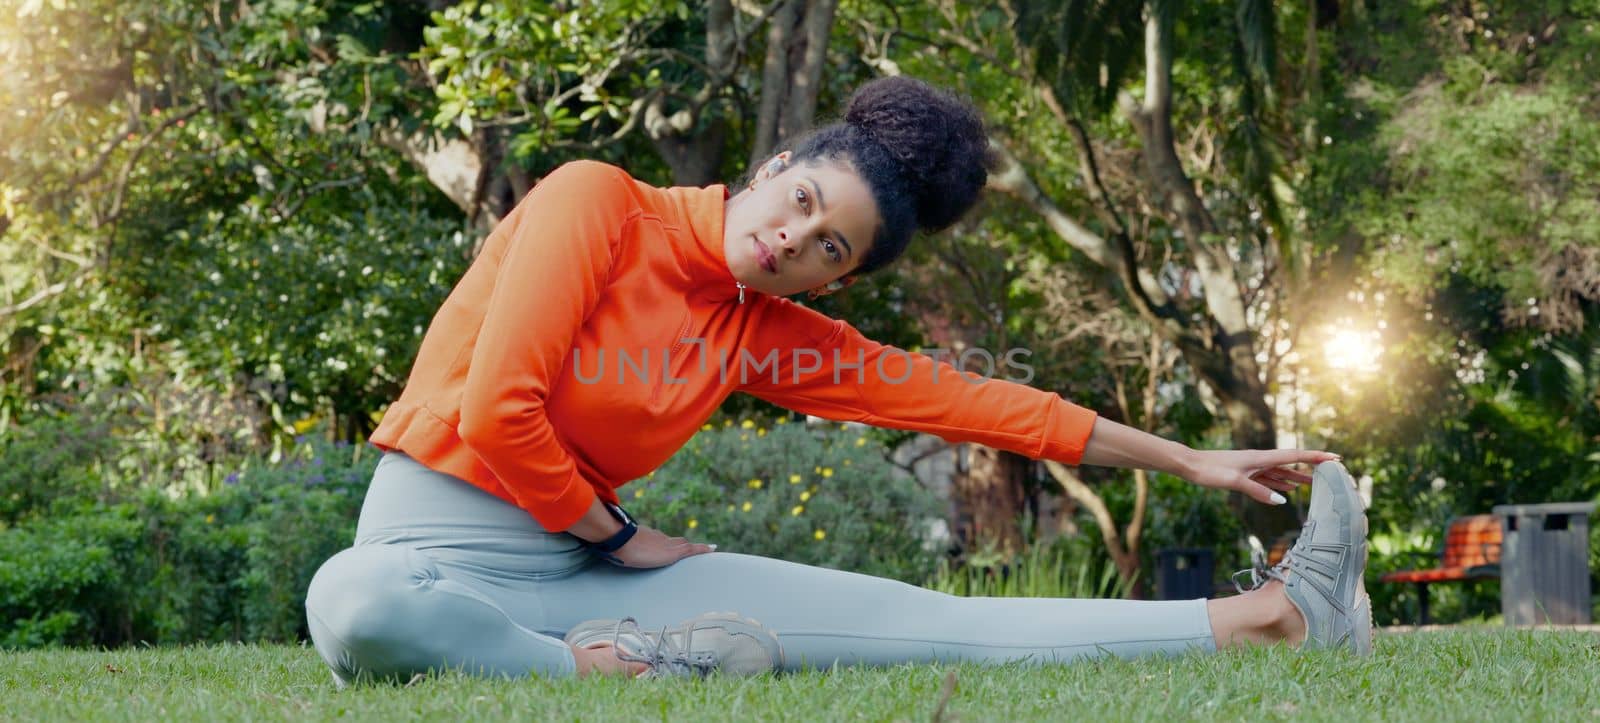 Stretching, calm and breathing woman on grass in park or nature environment for fitness workout session. Wellness and health lifestyle of sports person doing muscle relax exercise sitting on ground.